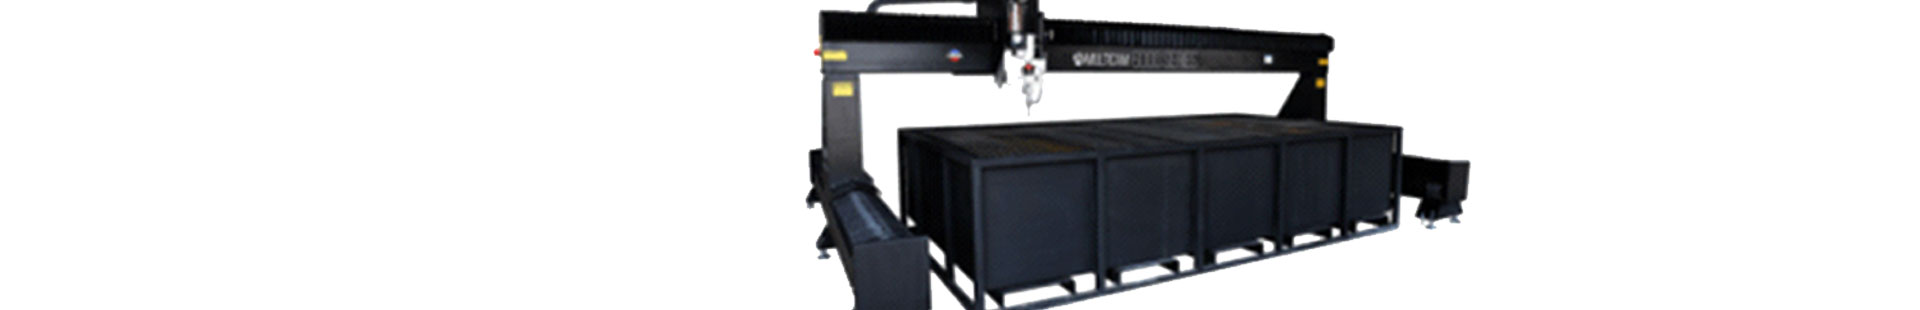 MULTICAM-CNC-LARGE-FORMAT-WATERJET-CUTTING-TABLE-BANNER